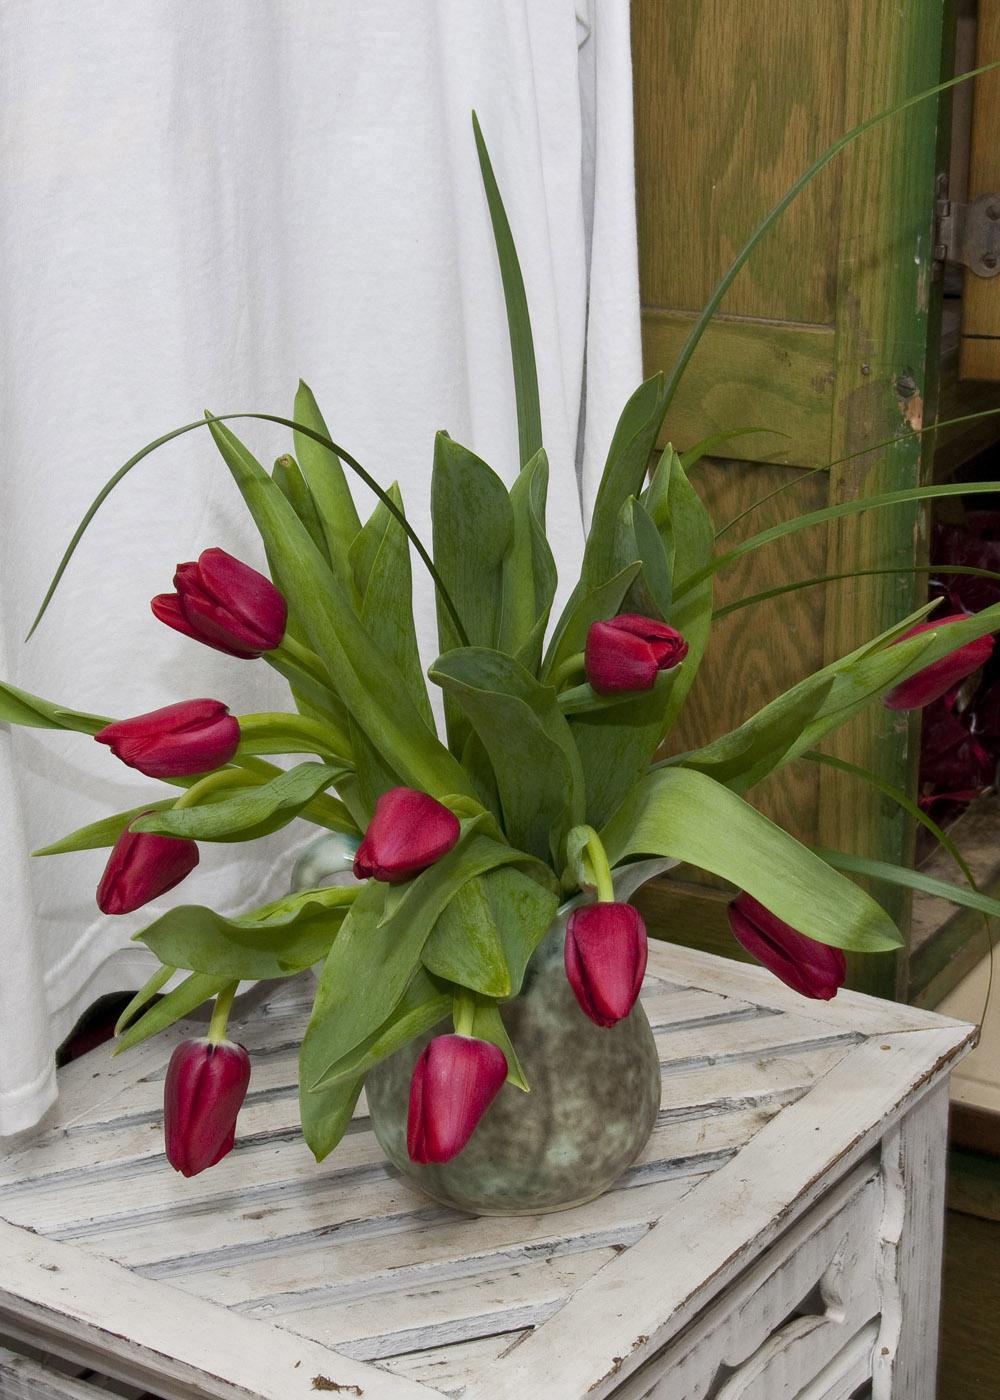 Savvy gardeners know they can share a message from the heart this Valentine's Day with the flowers they give. Tradition says red tulips tell the recipient, "I love you." (Photo by Scott Corey)